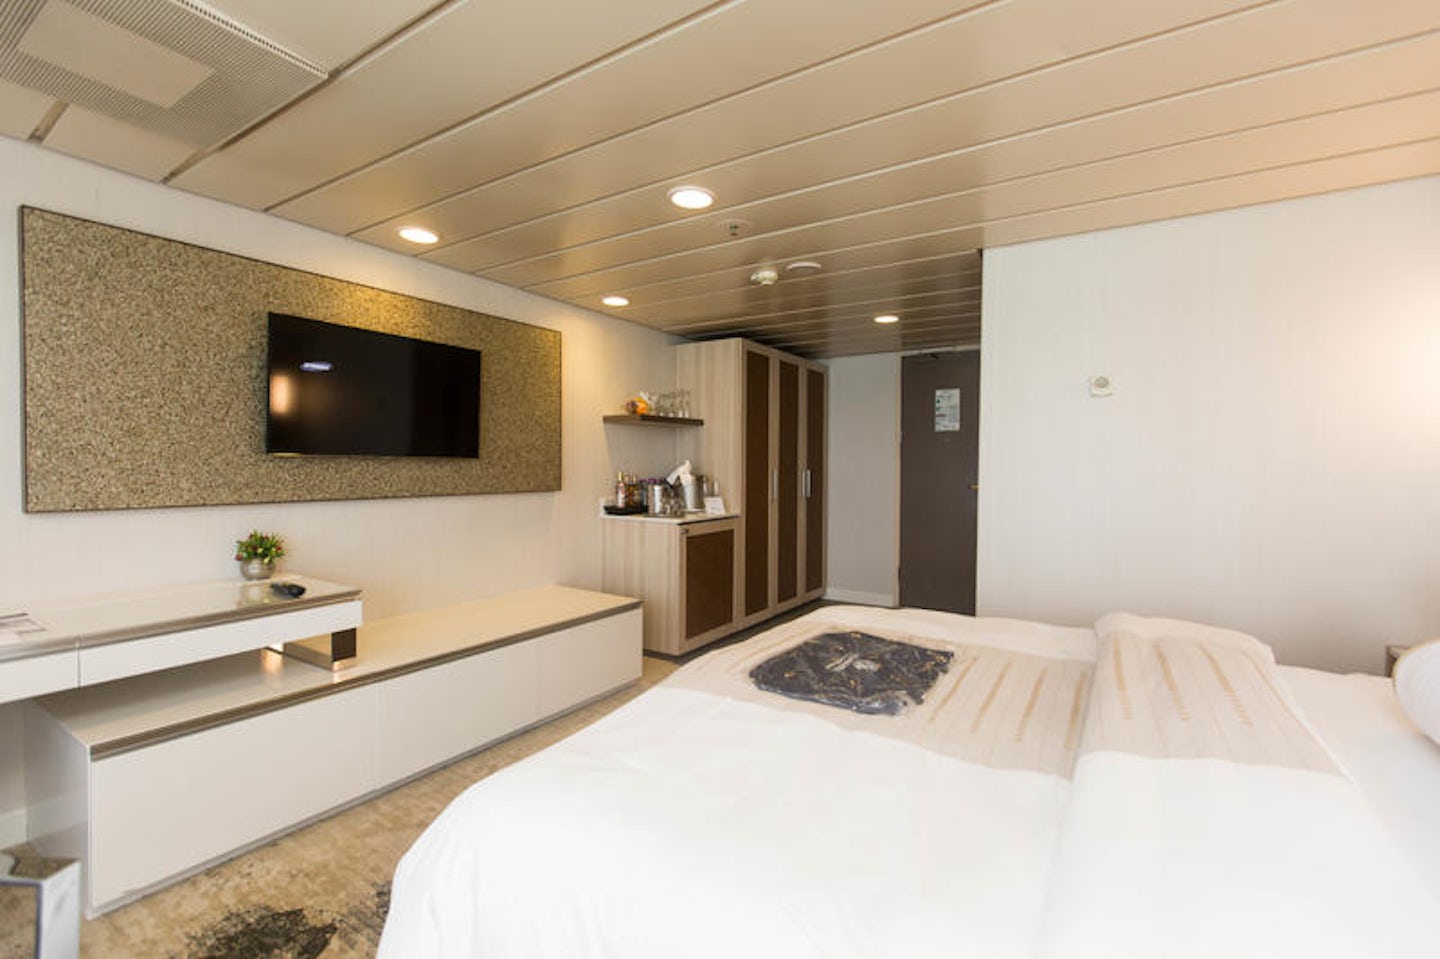 The Club Continent Suite on Azamara Journey